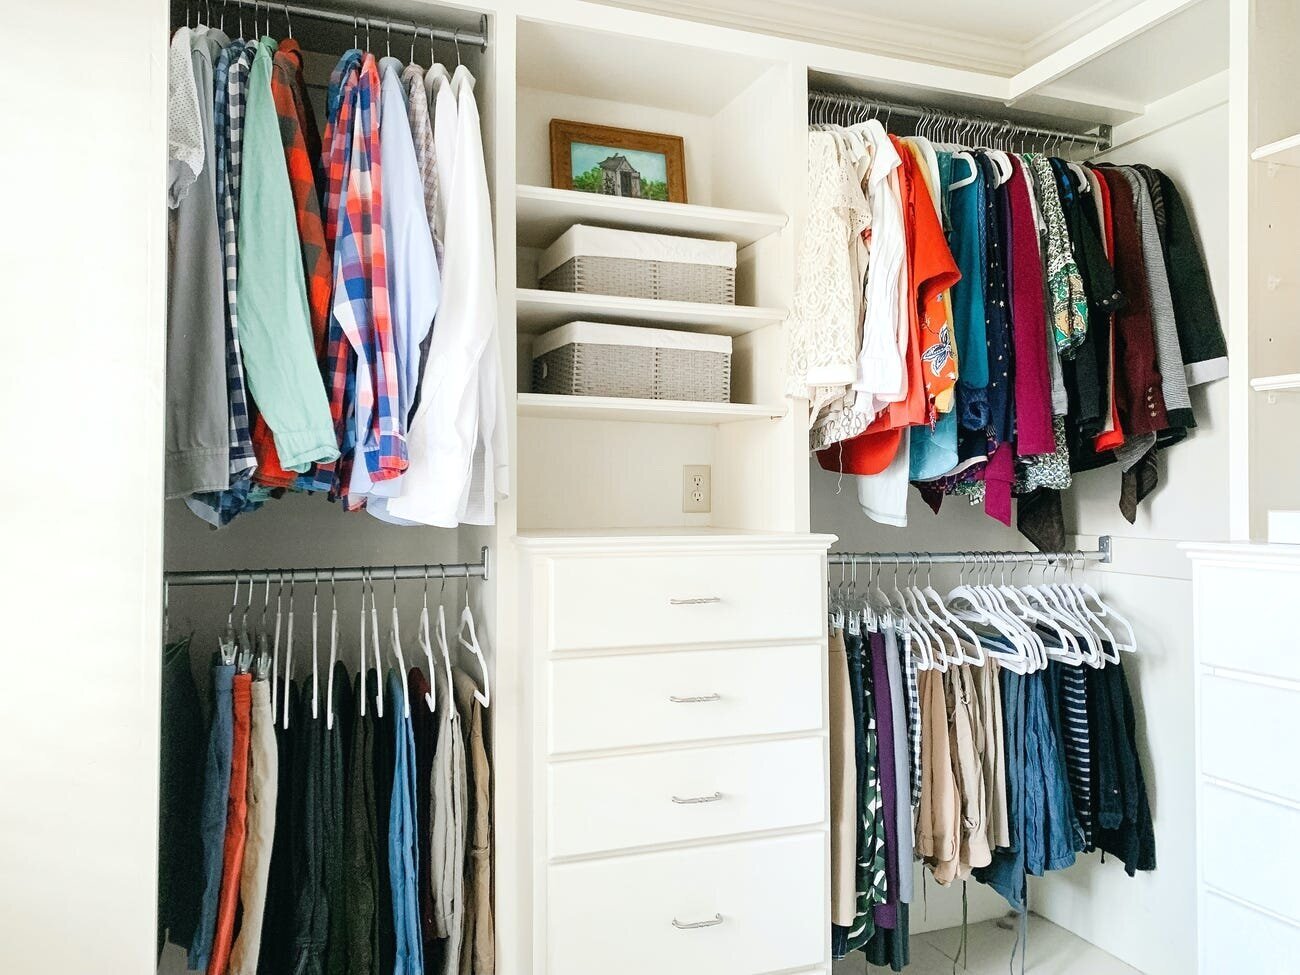 INSIDER: 19 photos of organized closets and pantries that will inspire you to clean